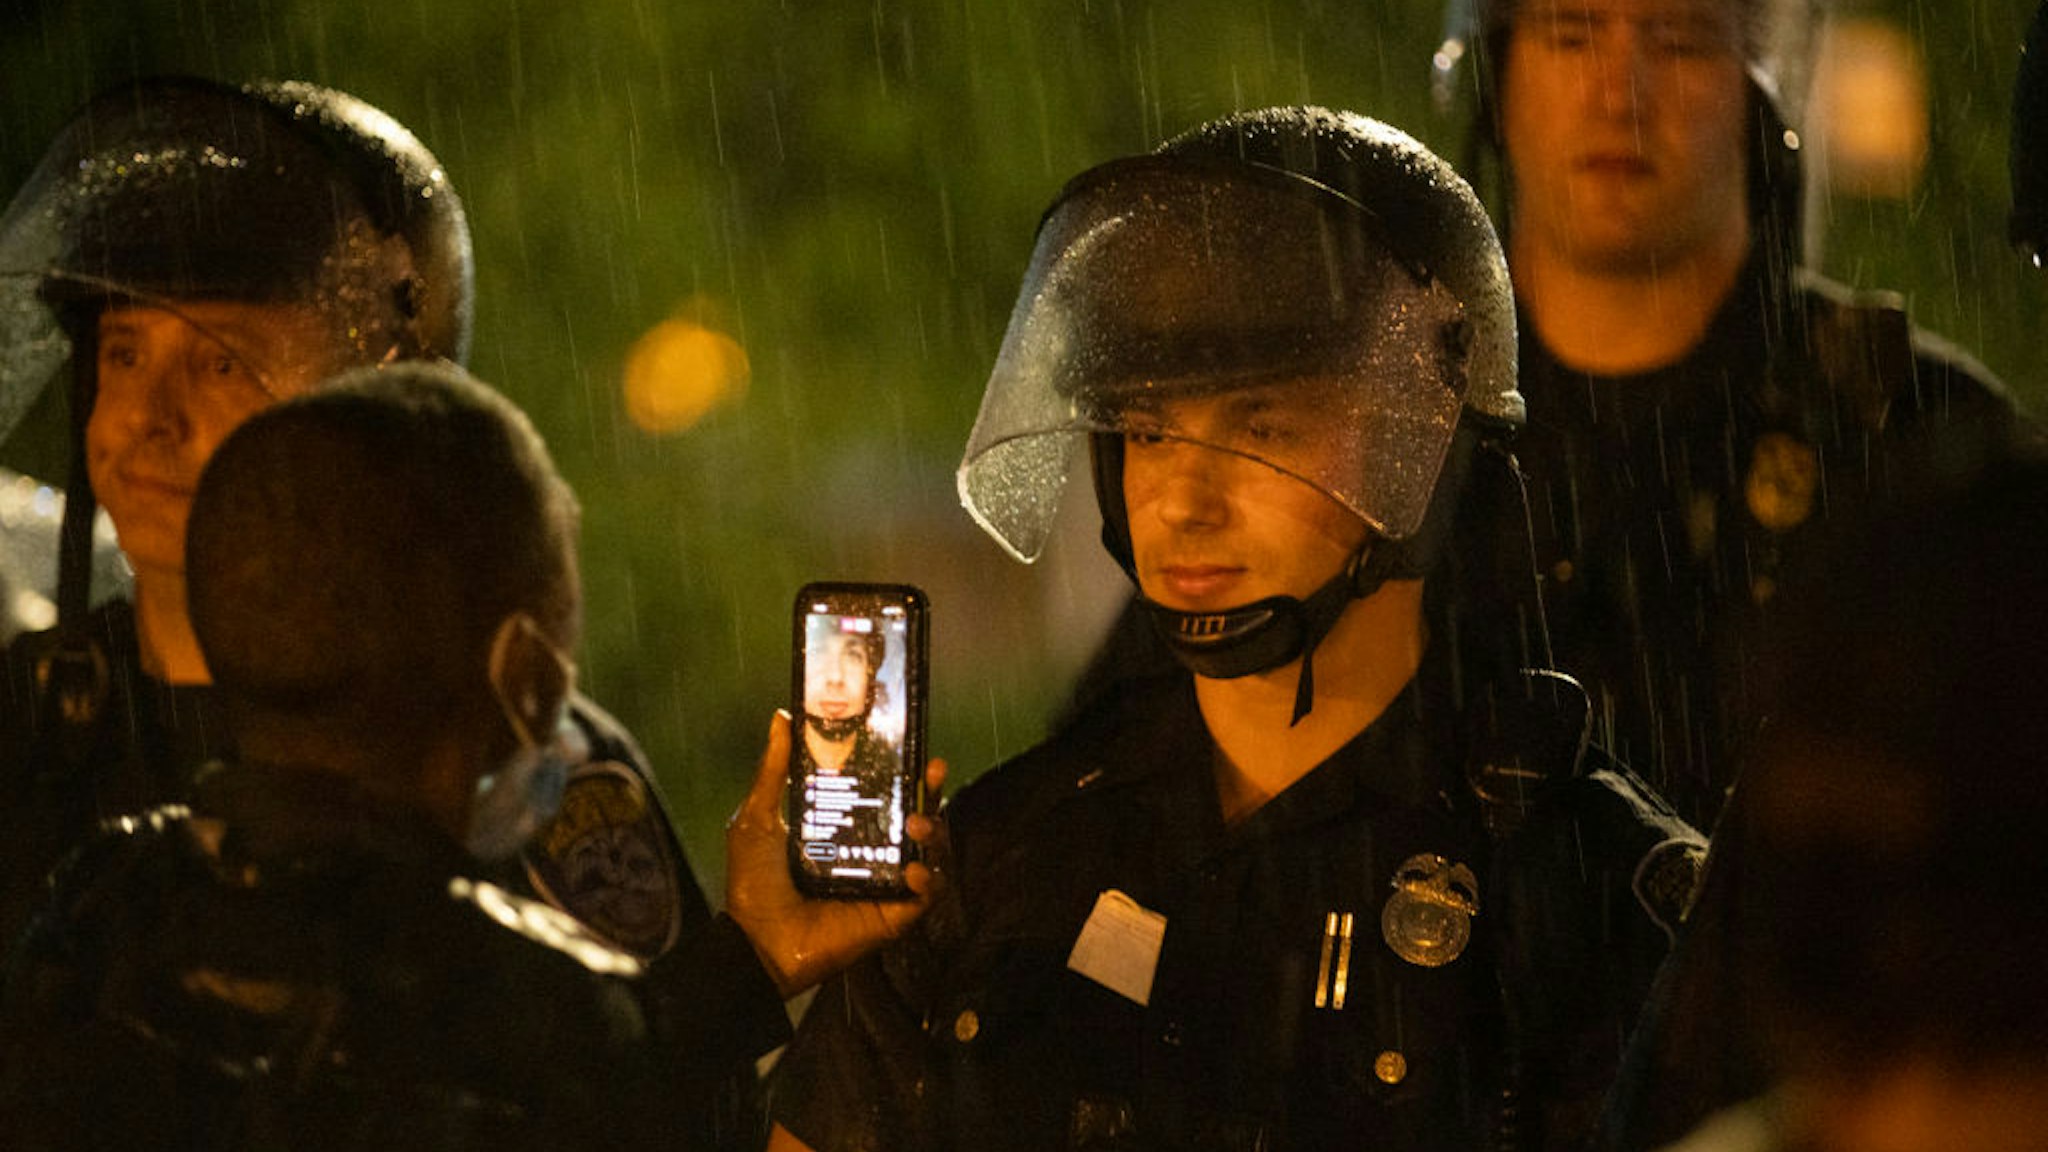 A police officer stands watch during a protest on September 03, 2020 in Rochester, New York. Daniel Prude died after being arrested on March 23, by Rochester police.